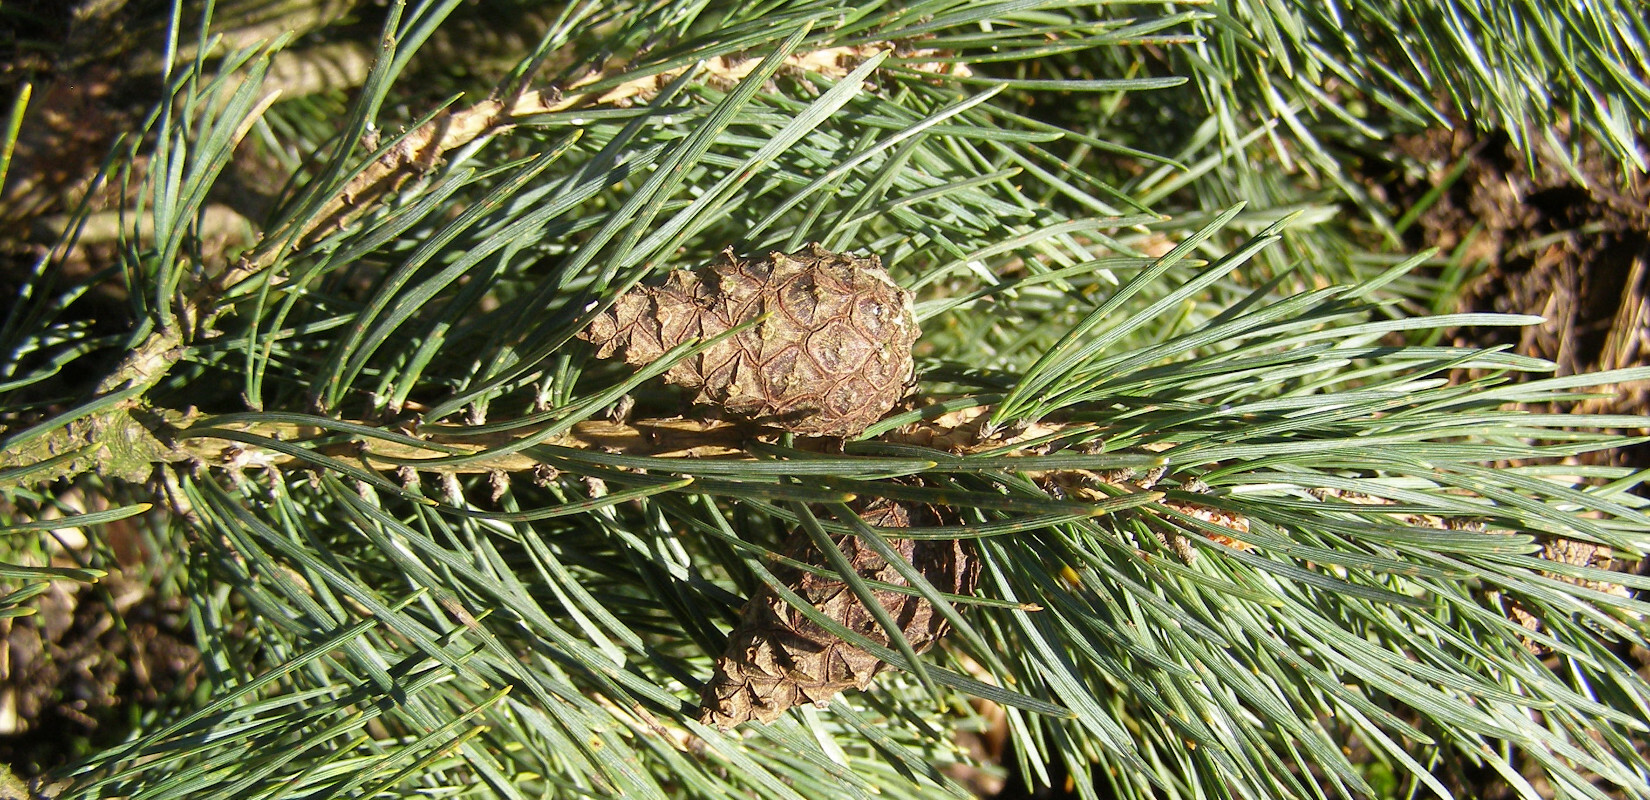 A pine shoot with cones